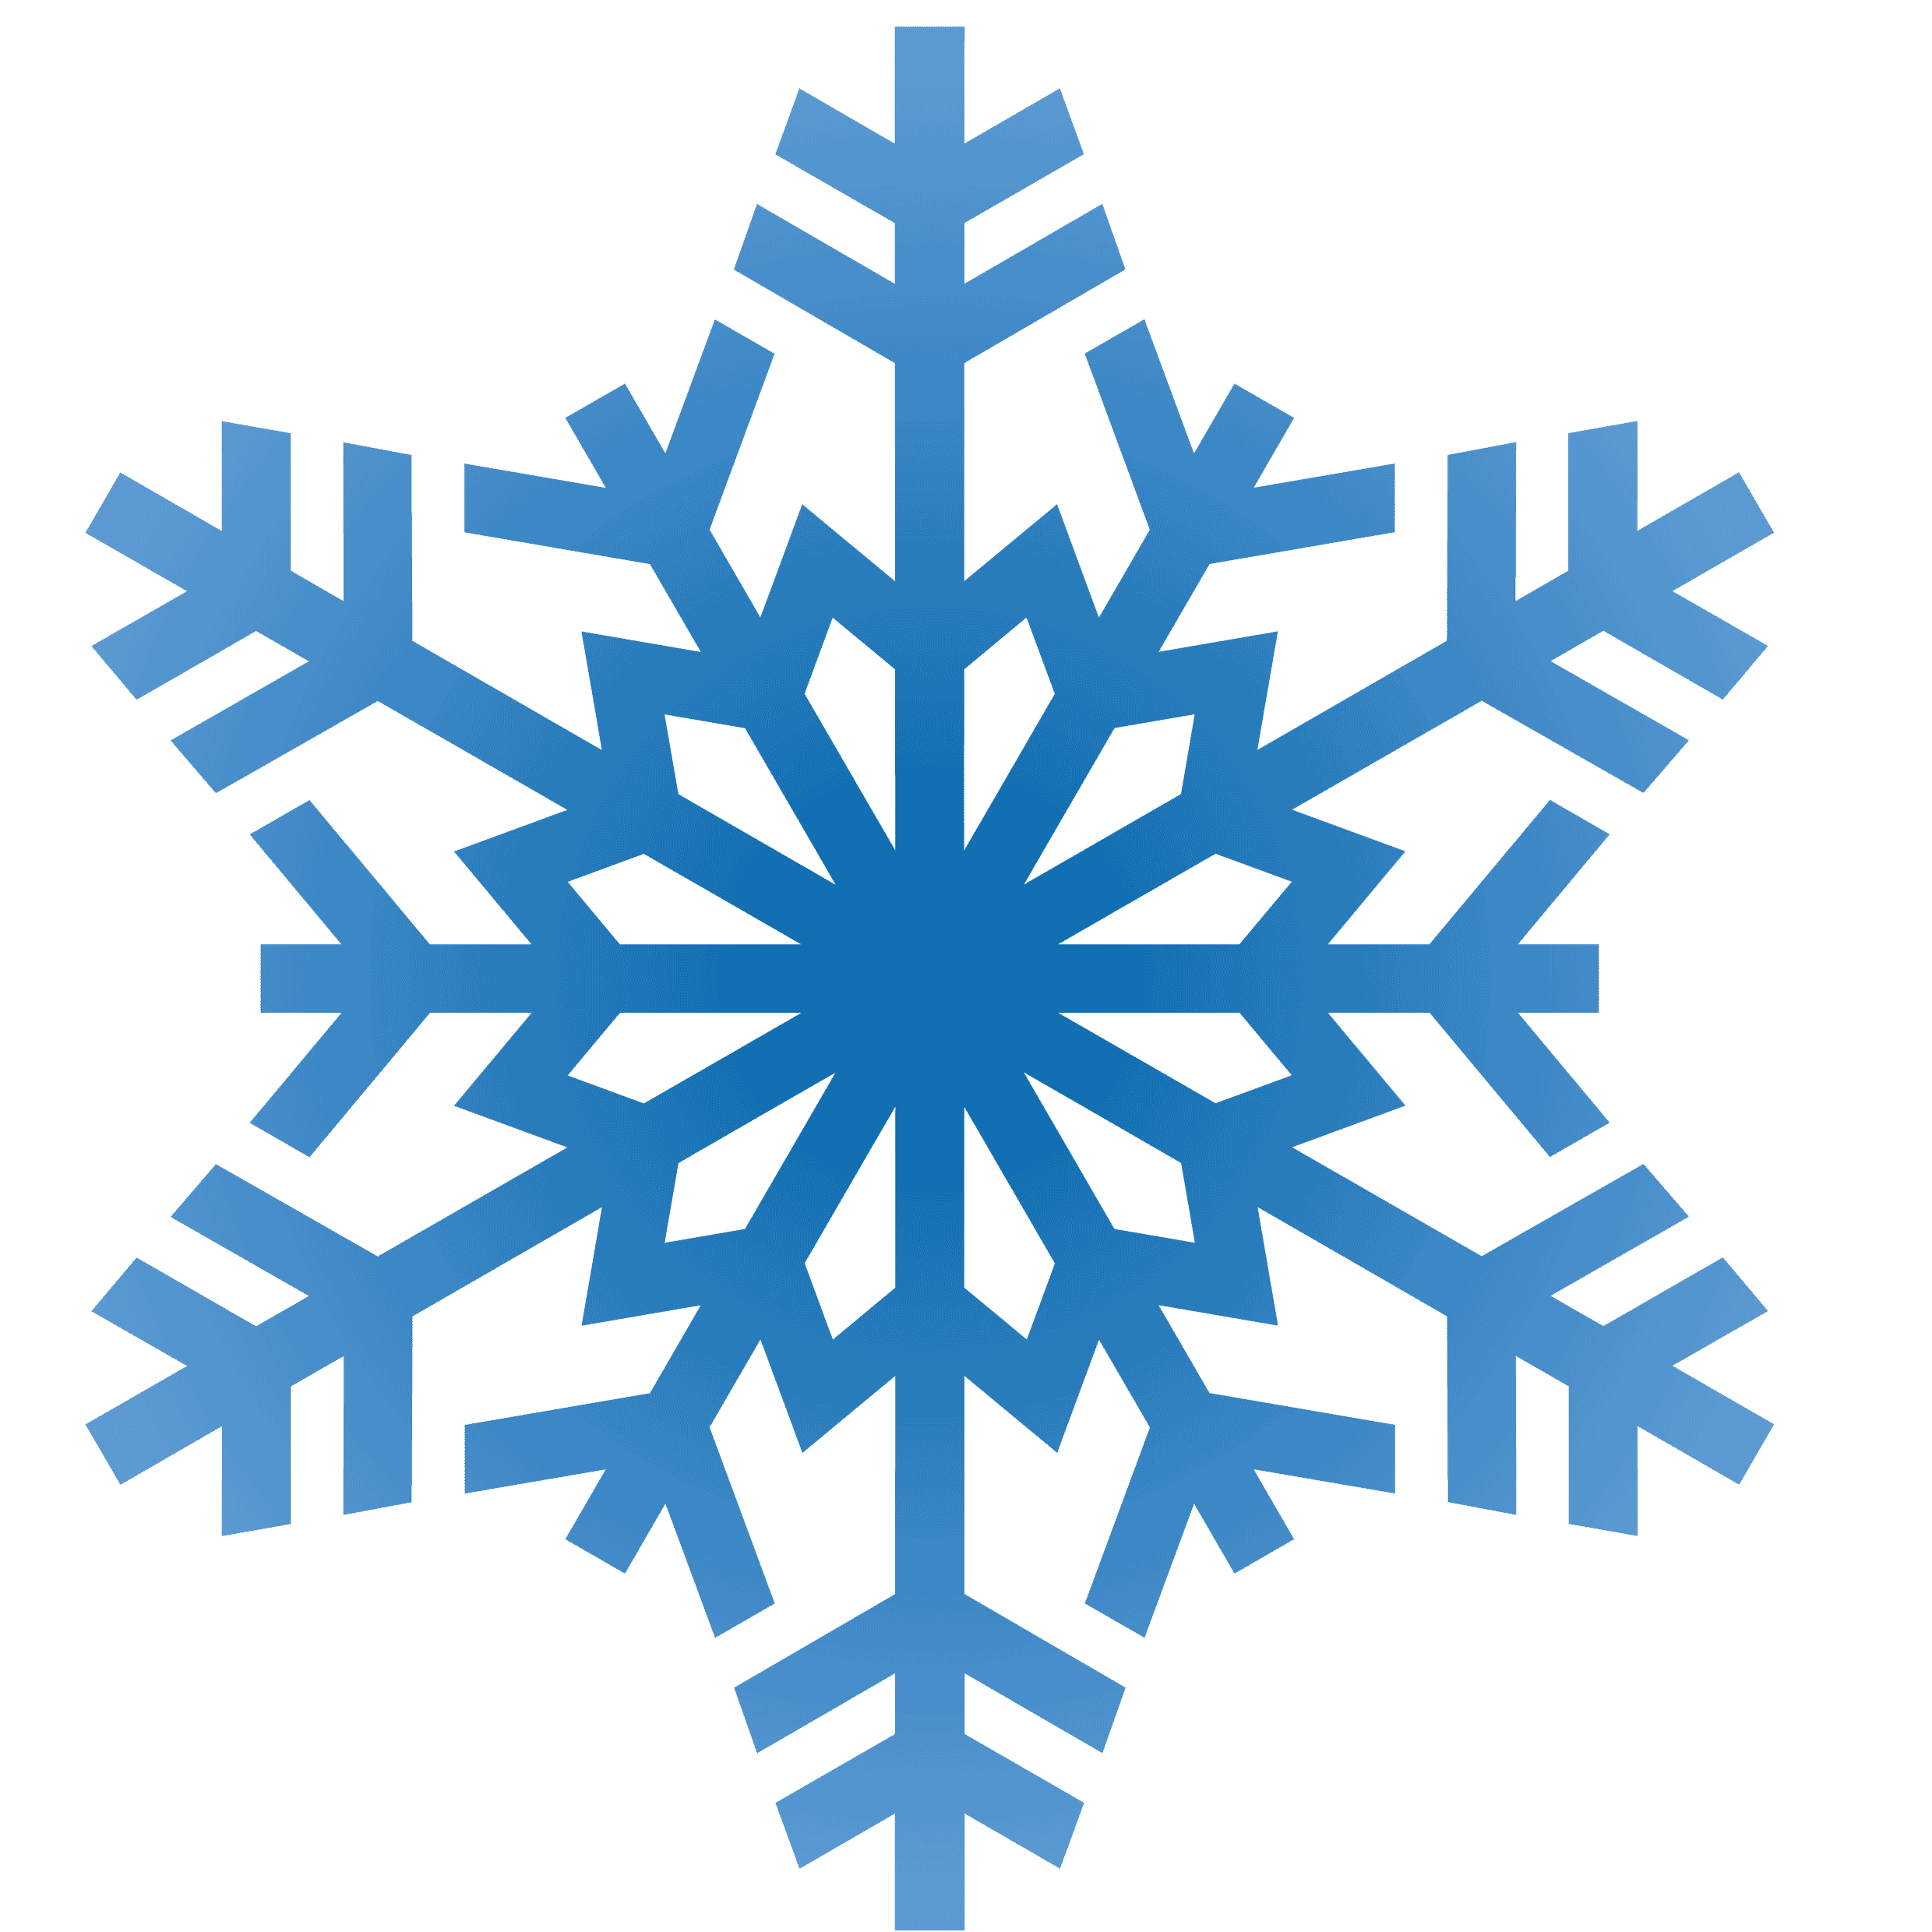 Blue Snowflakes تنزيل PNG